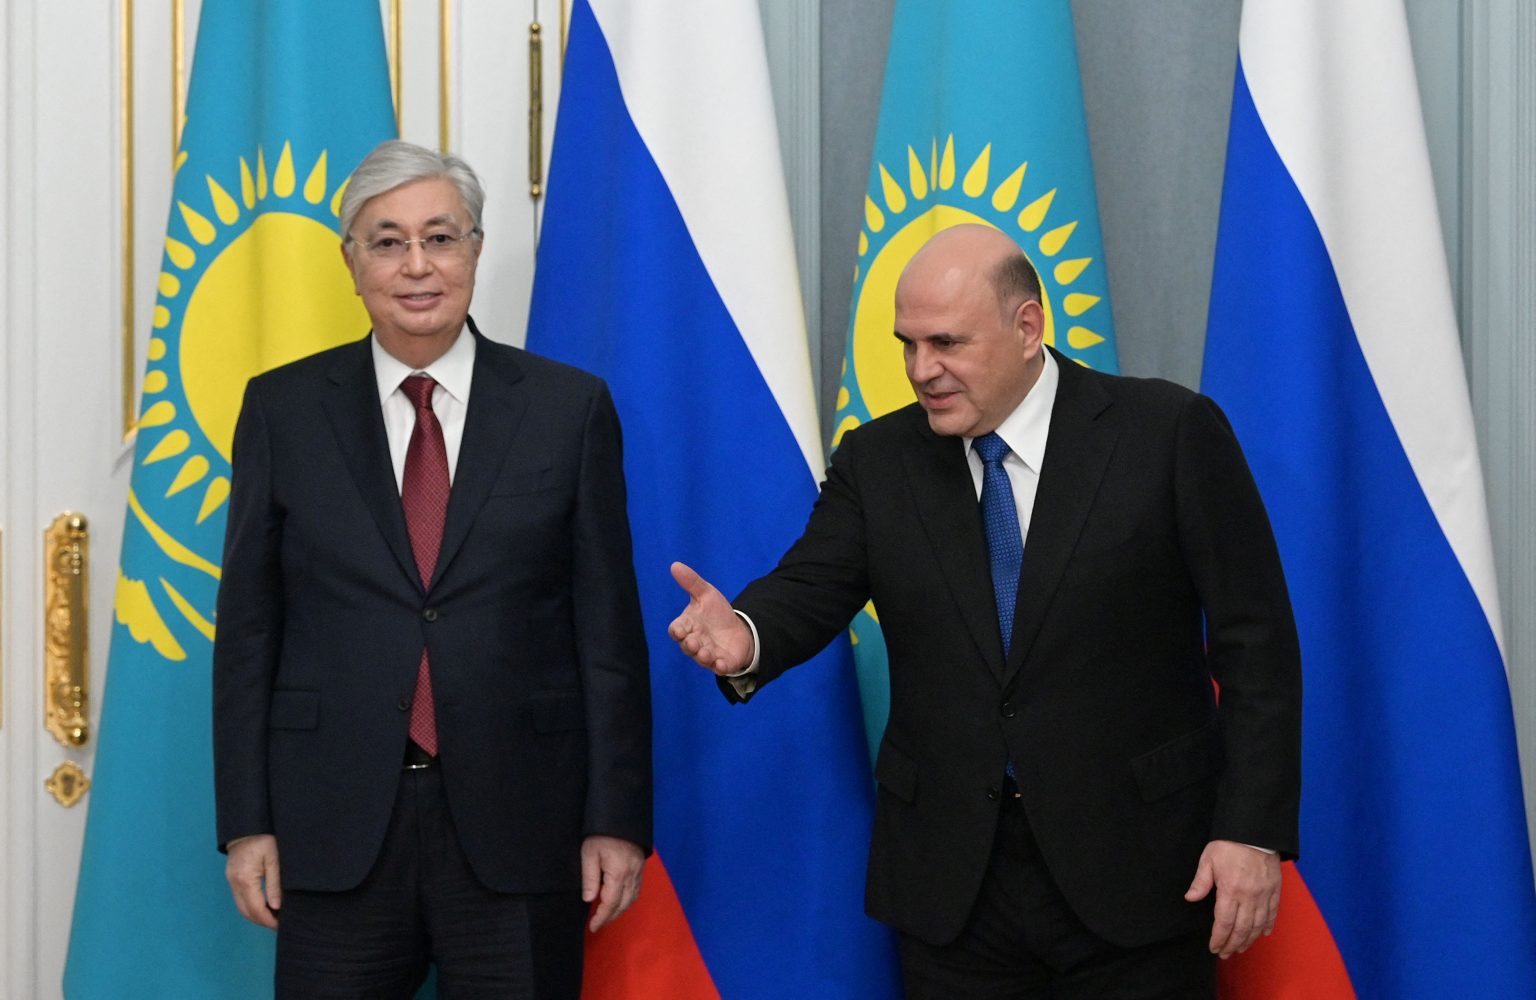 Strained ties with Russia boost prospects for Central Asian integration ...